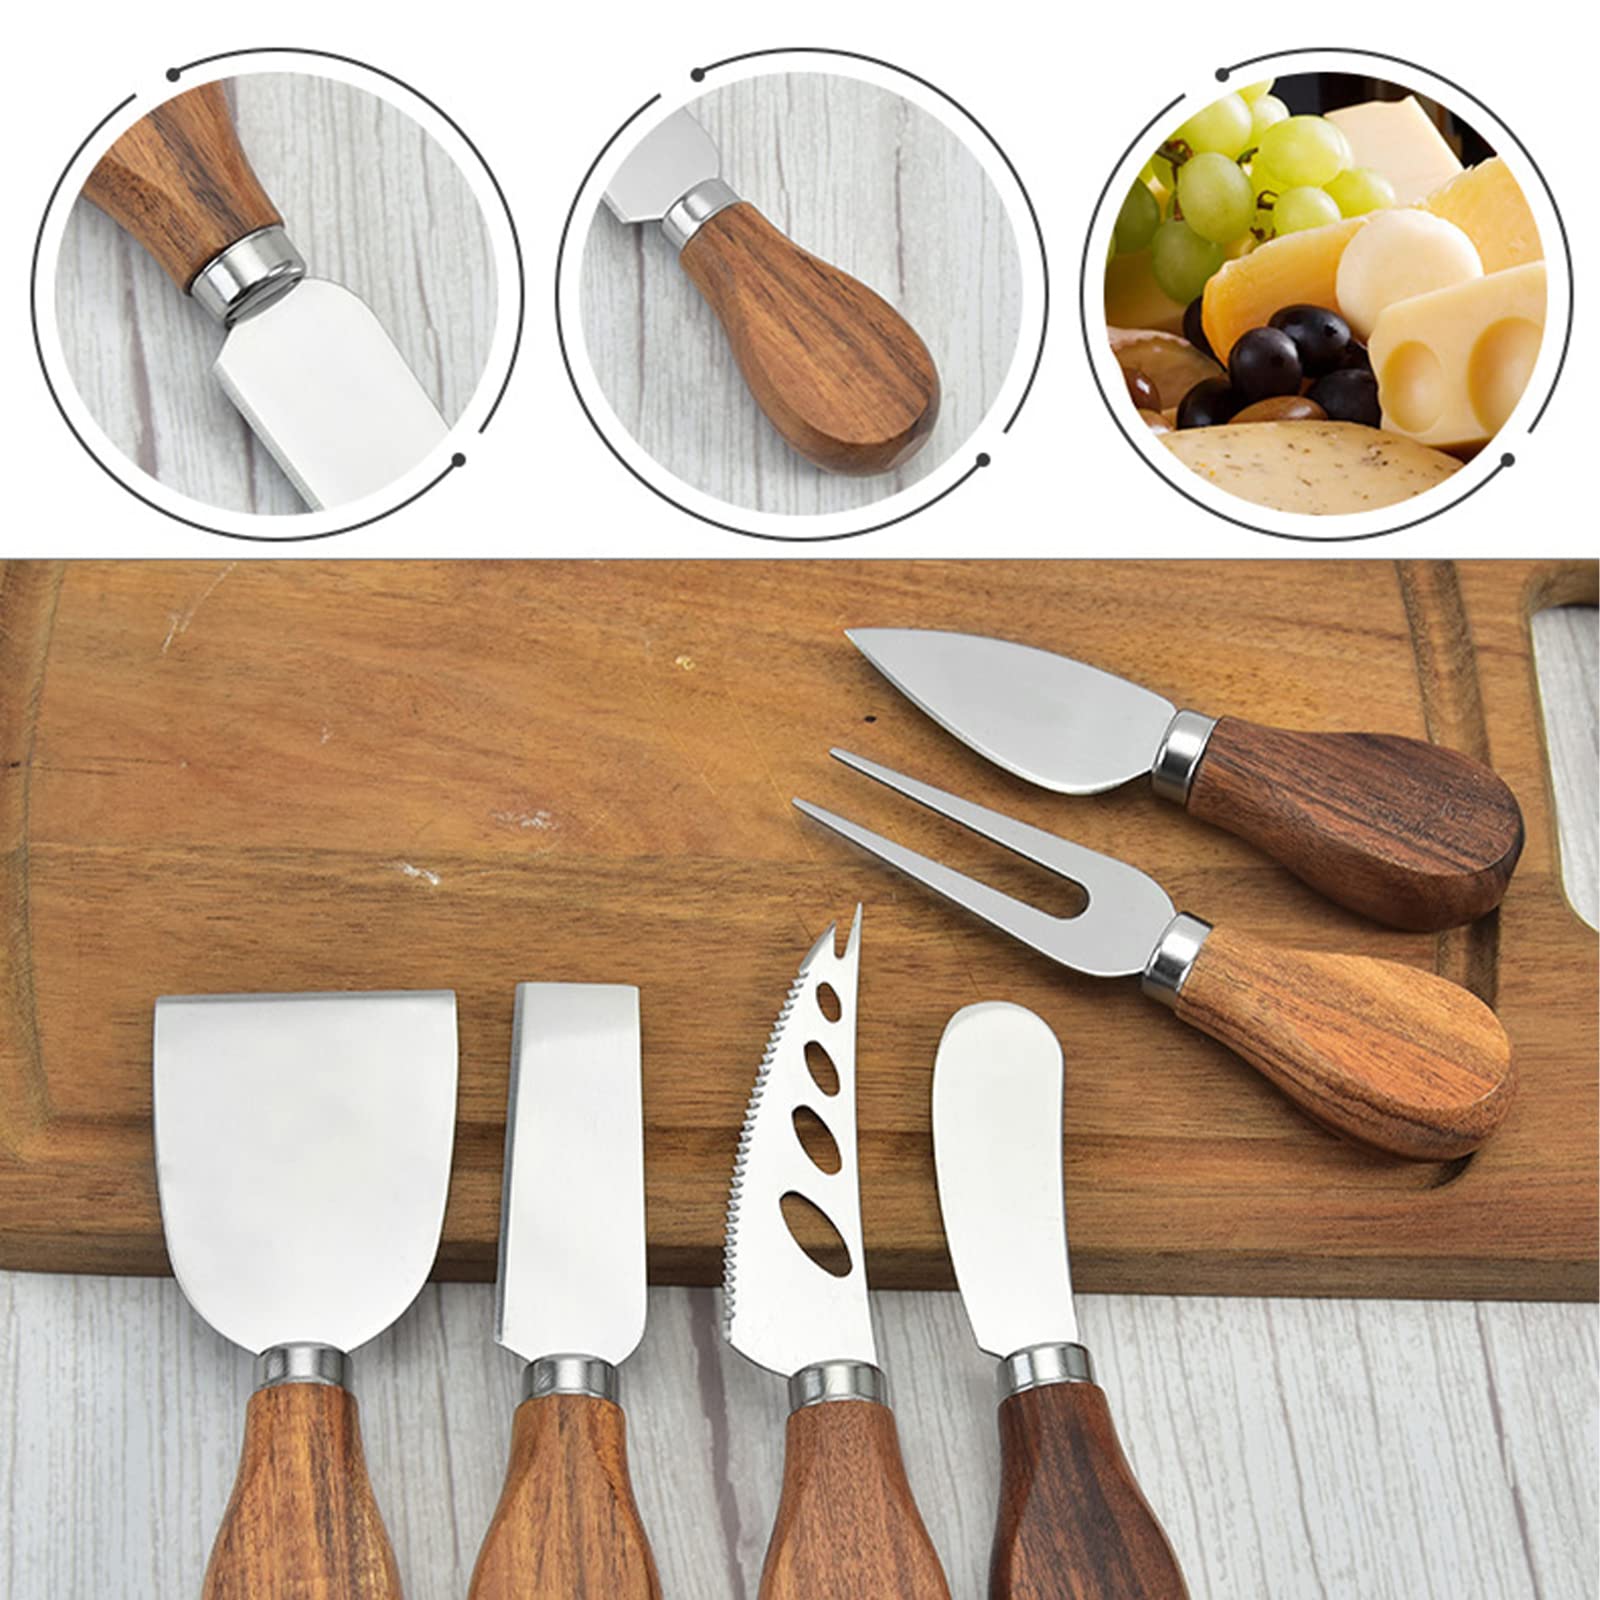 Okllen 6 Piece Cheese Knives Set with Acacia Wood Handles, Stainless Steel Cheese Knife Collection Cutlery Gift Set Cheese Slicer, Cutter, Fork, Spreading Knife for Charcuterie Boards, Pizza, Cake